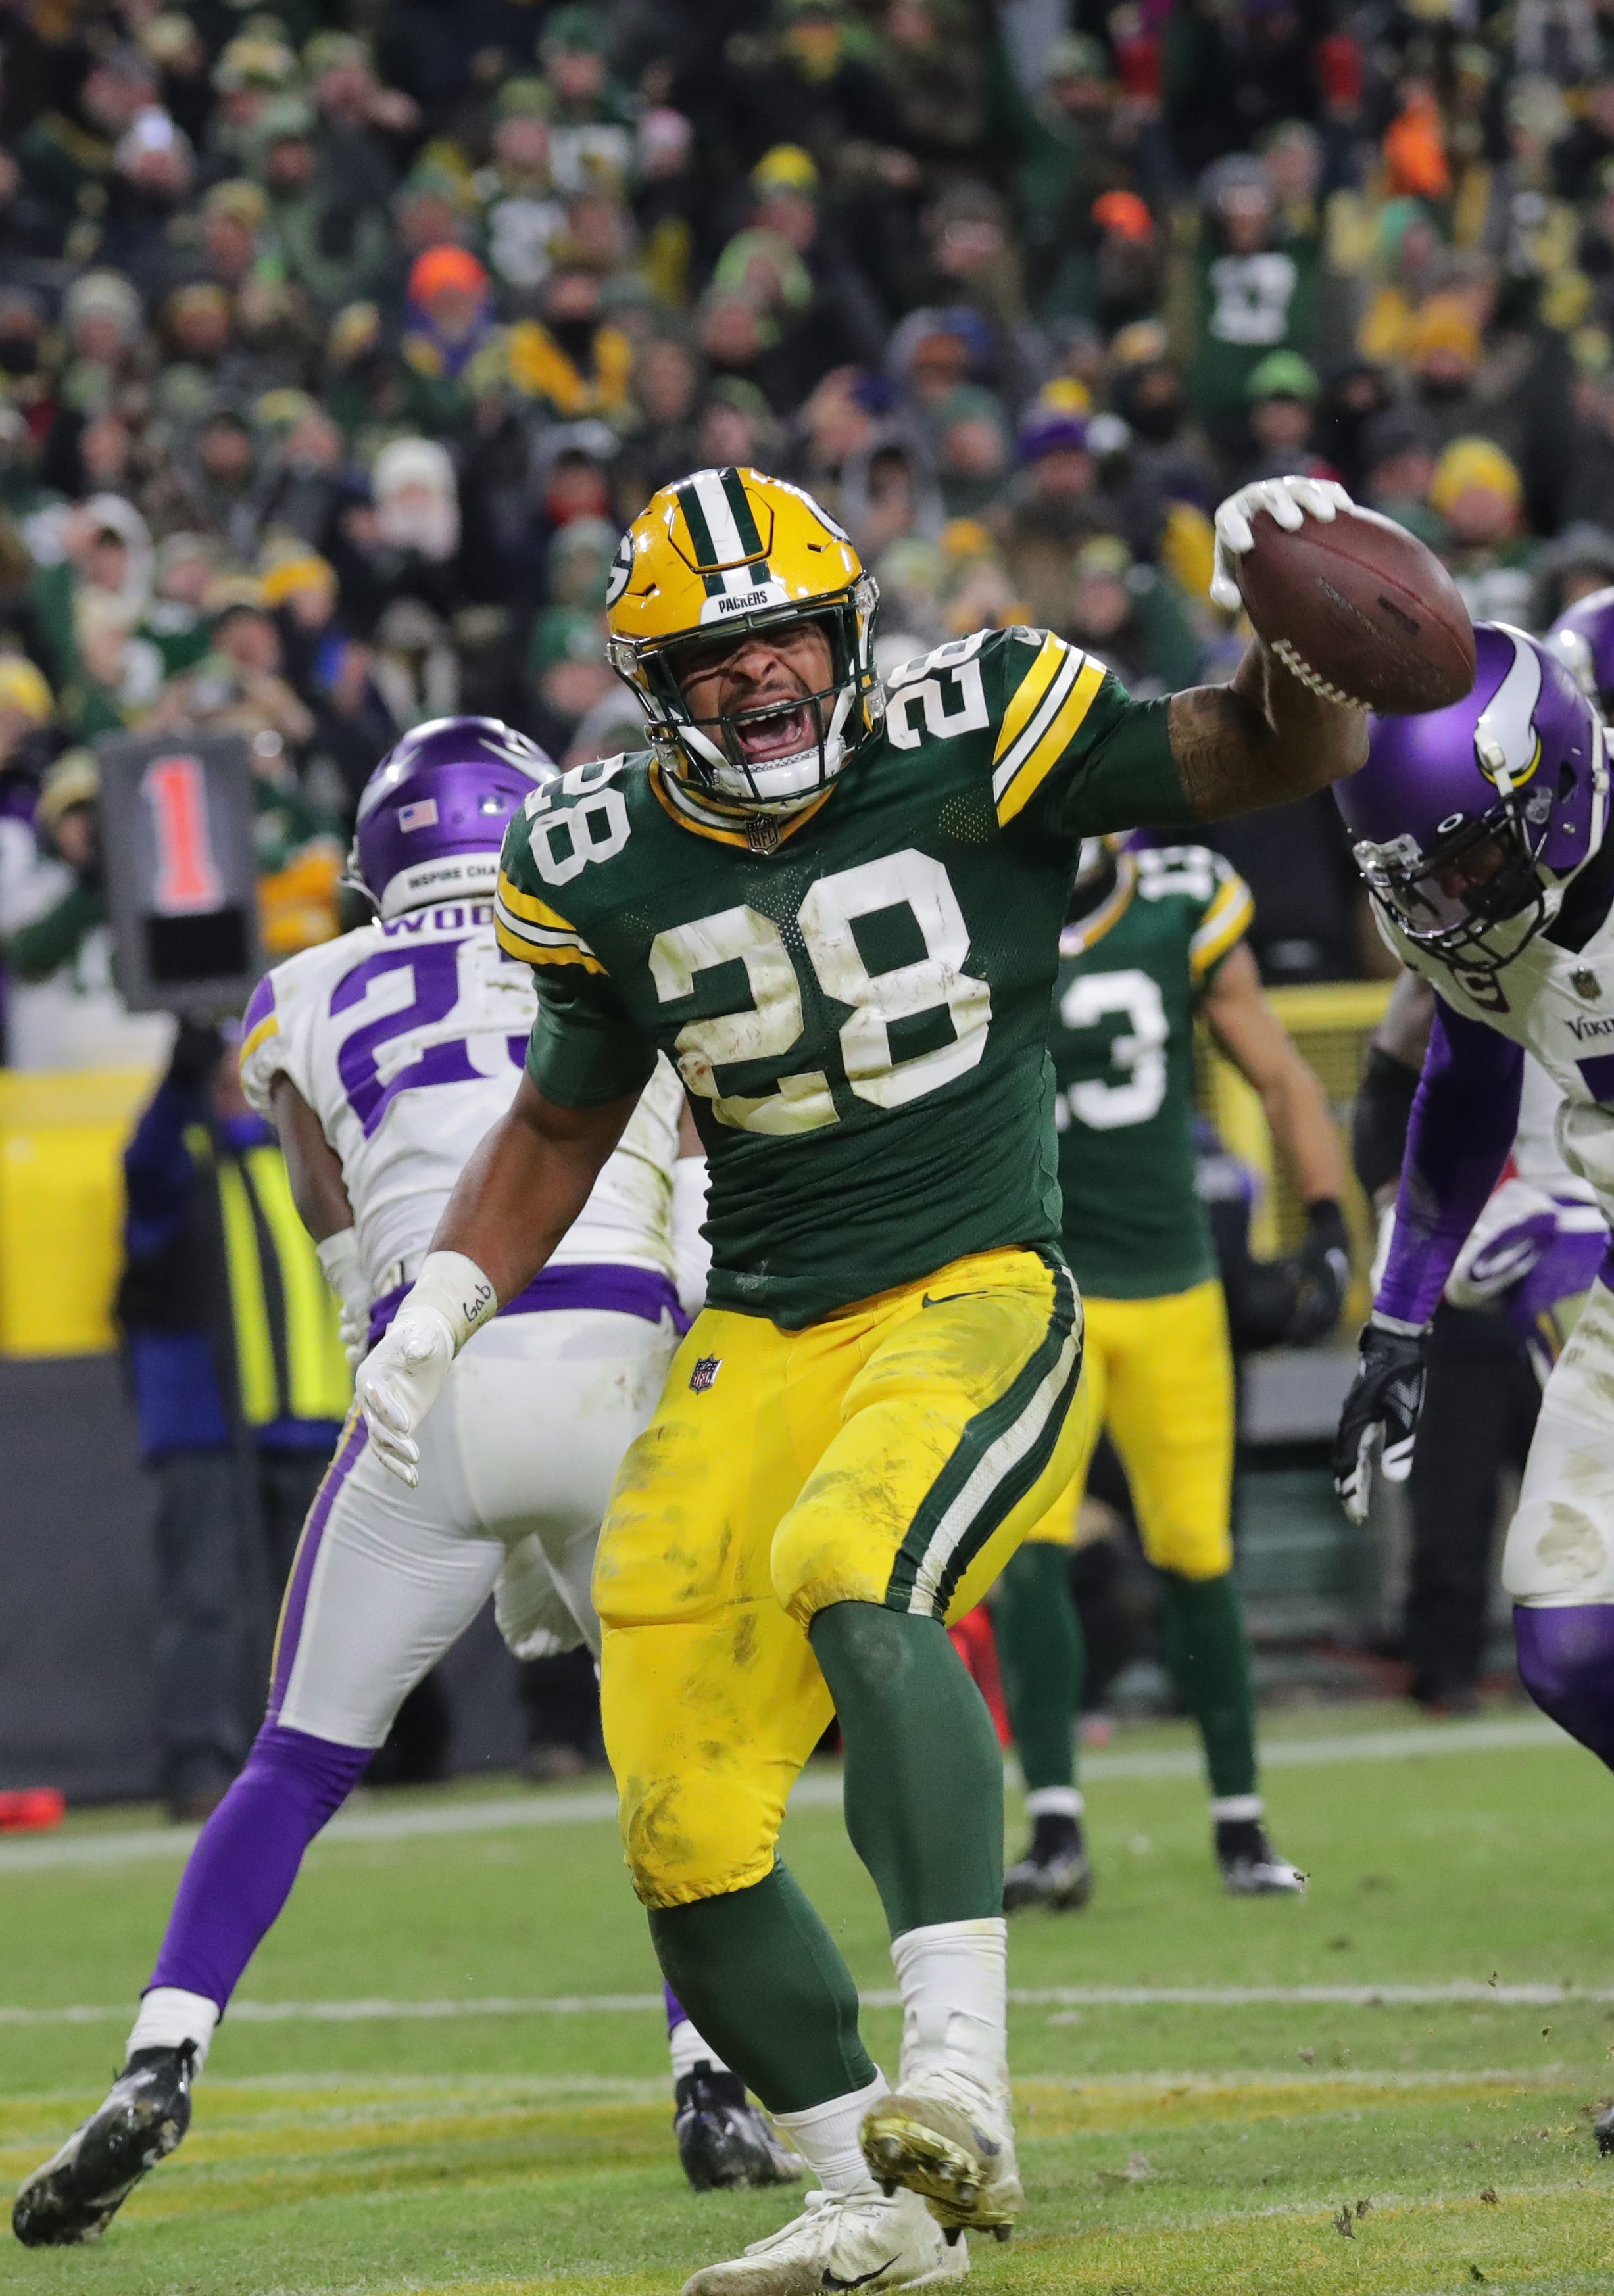 Green Bay Packers running back A.J. Dillon (28) scores touchdown during the the fourth quarter of their game Sunday, January 2, 2022 at Lambeau Field in Green Bay, Wis. The Green Bay Packers beat the Minnesota Vikings 37-10 to clinch a first round playoff bye.